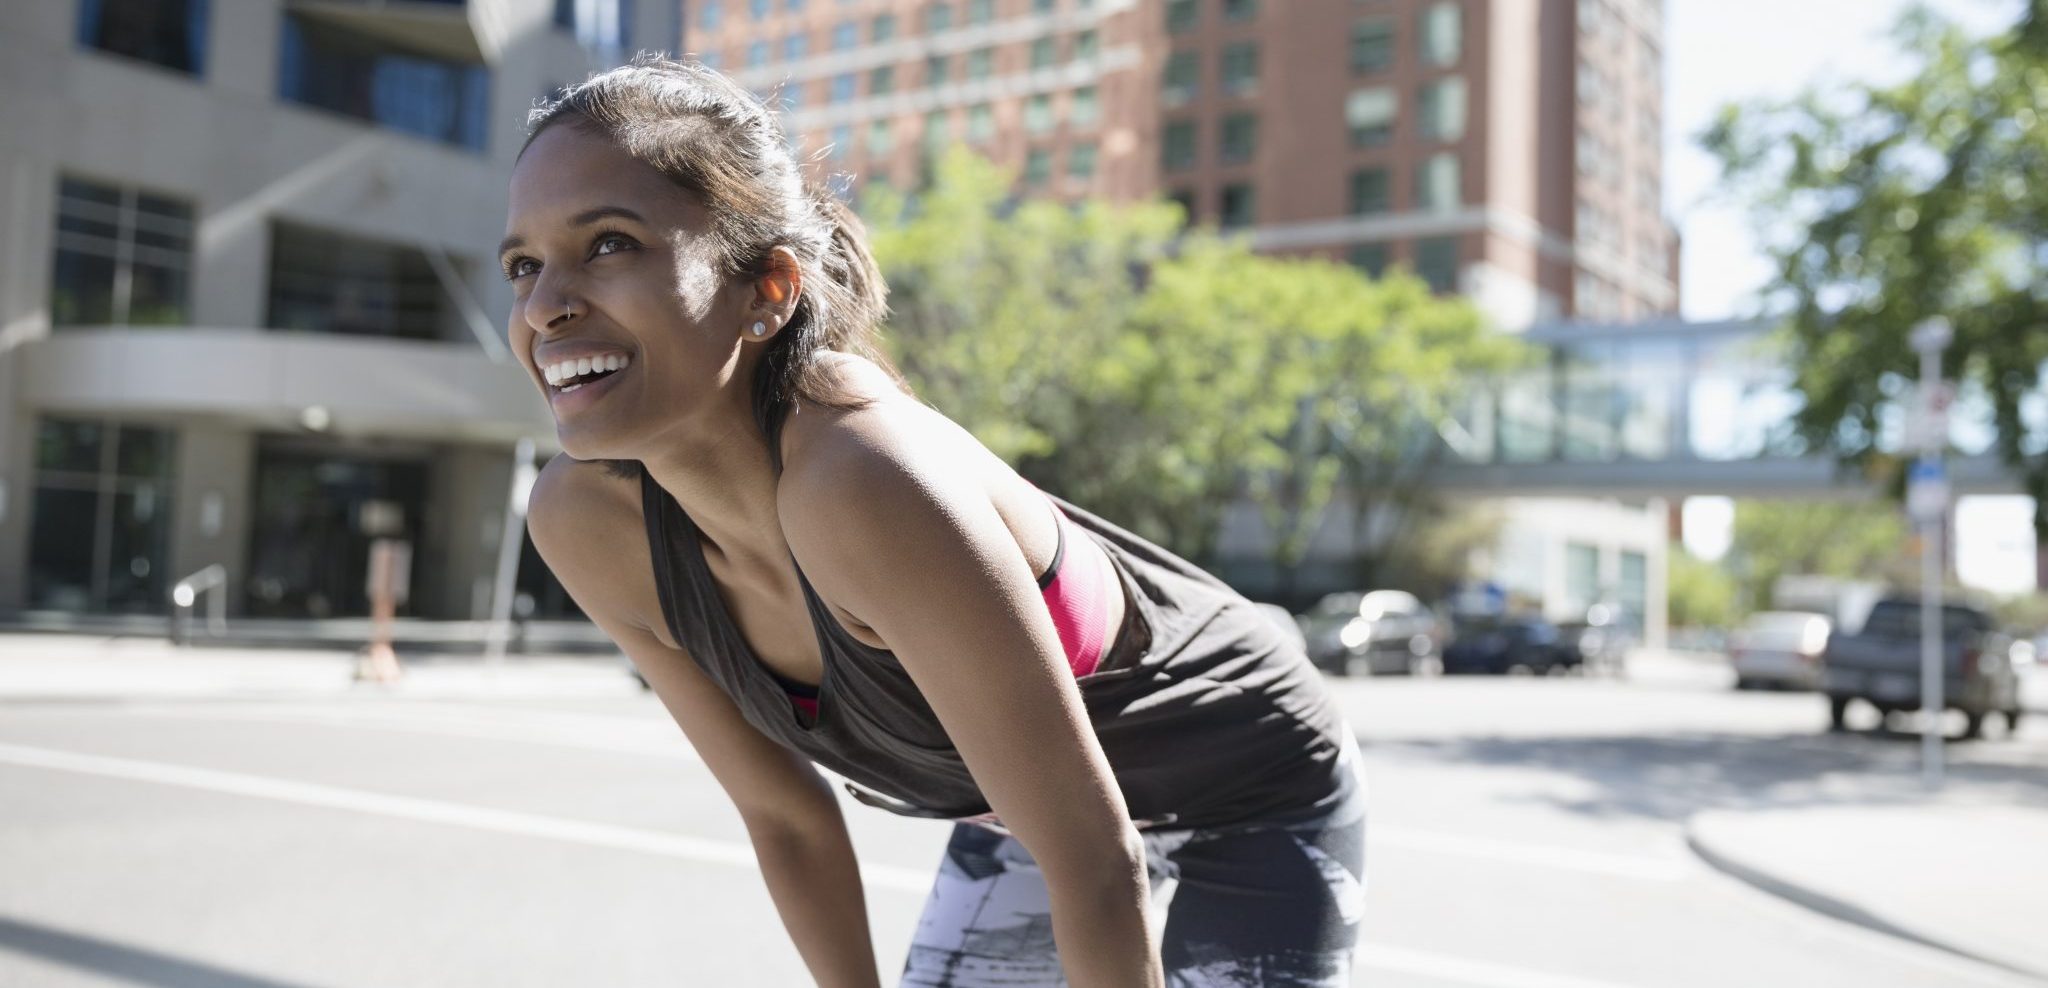 6 Best Possible Things You Can Do After a Run